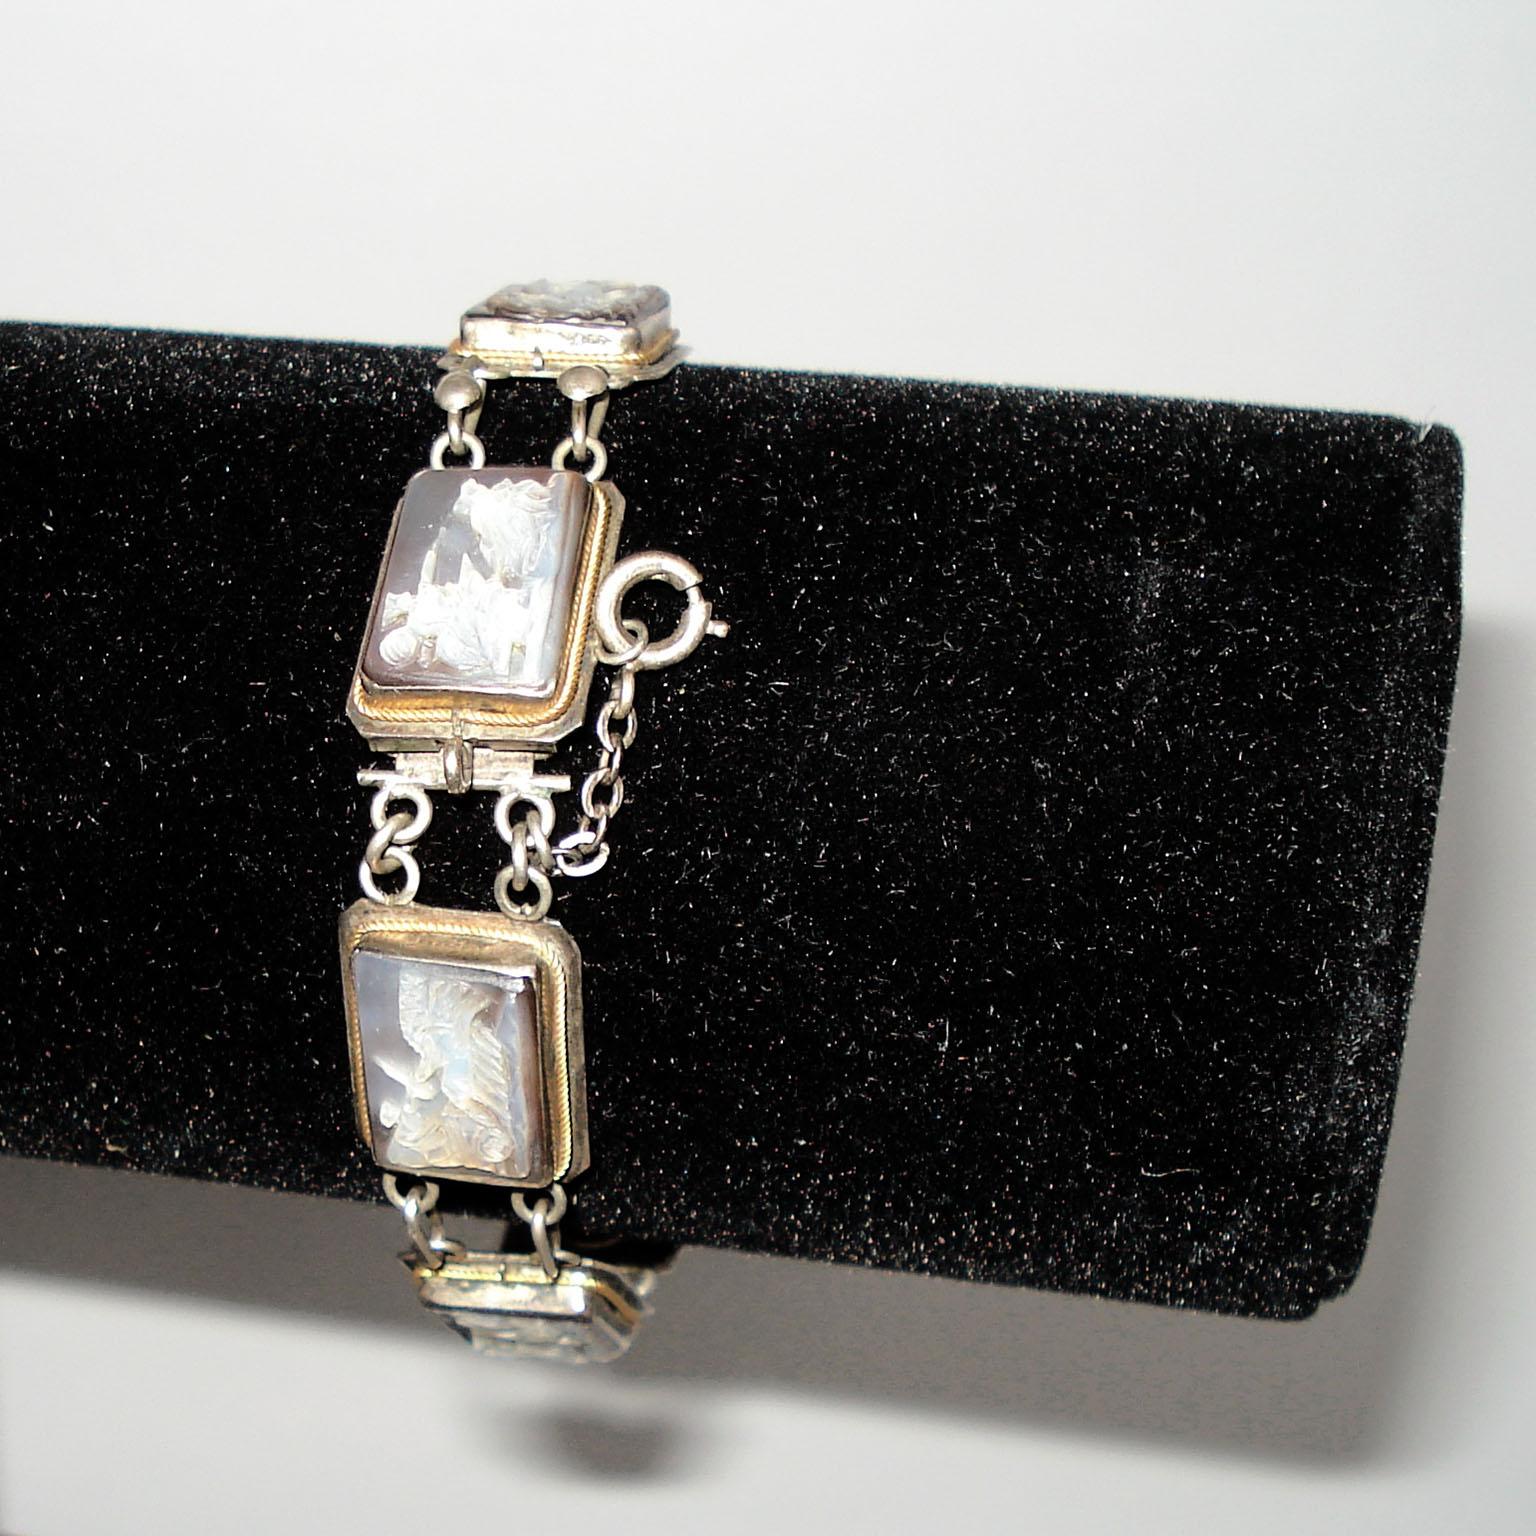 Art Deco link silver bracelet with chariots motif.
A wonderful seven days of the week Art Deco silver bracelet, Italy, 1920s. Marked 800 for purity of silver. Clasp in good working order. Safety extra closure with chain. Very good overall condition,